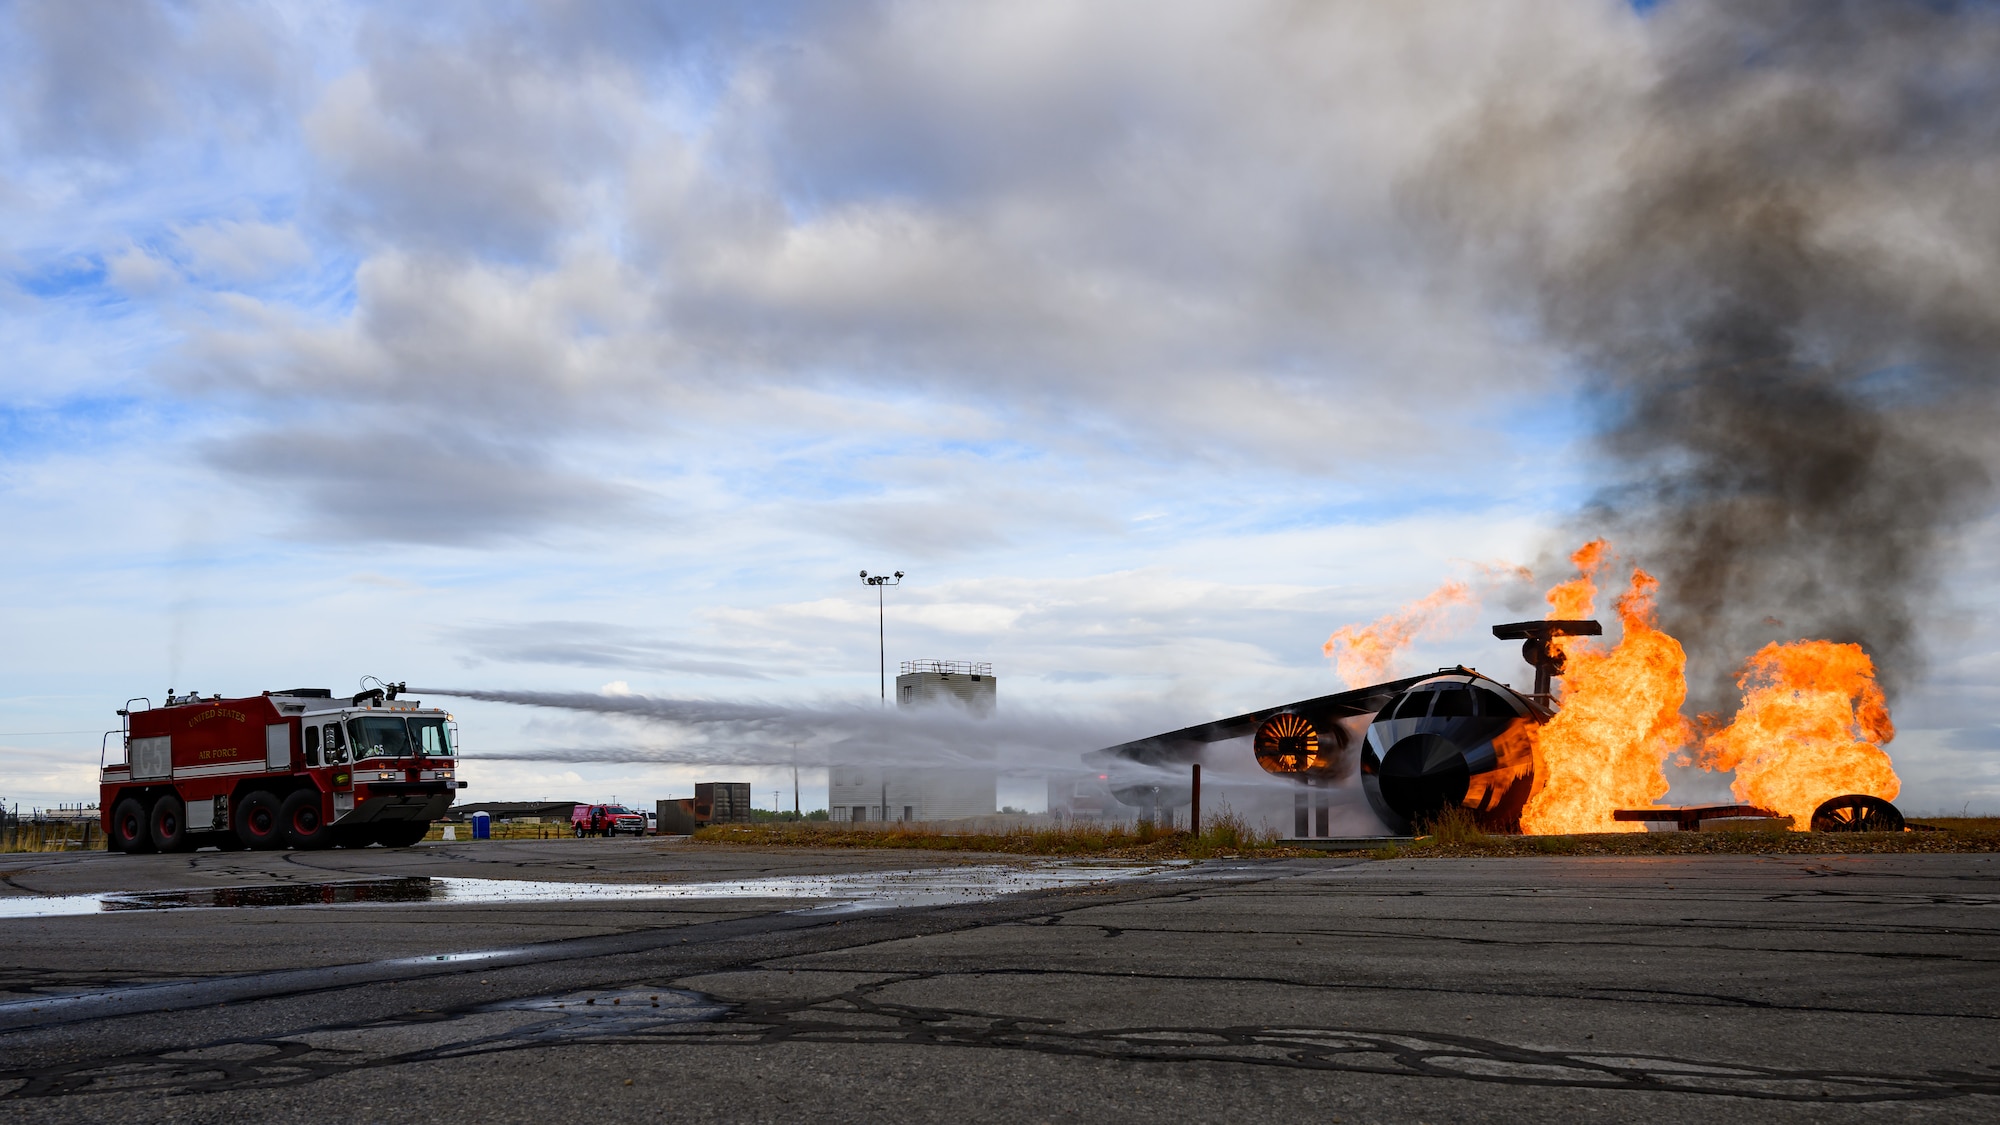 Firefighters with the 775th Fire & Emergency Services Flight respond to a simulated attack and aircraft fire during a Phase 2 exercise at Hill Air Force Base, Utah, Sept. 14, 2022.